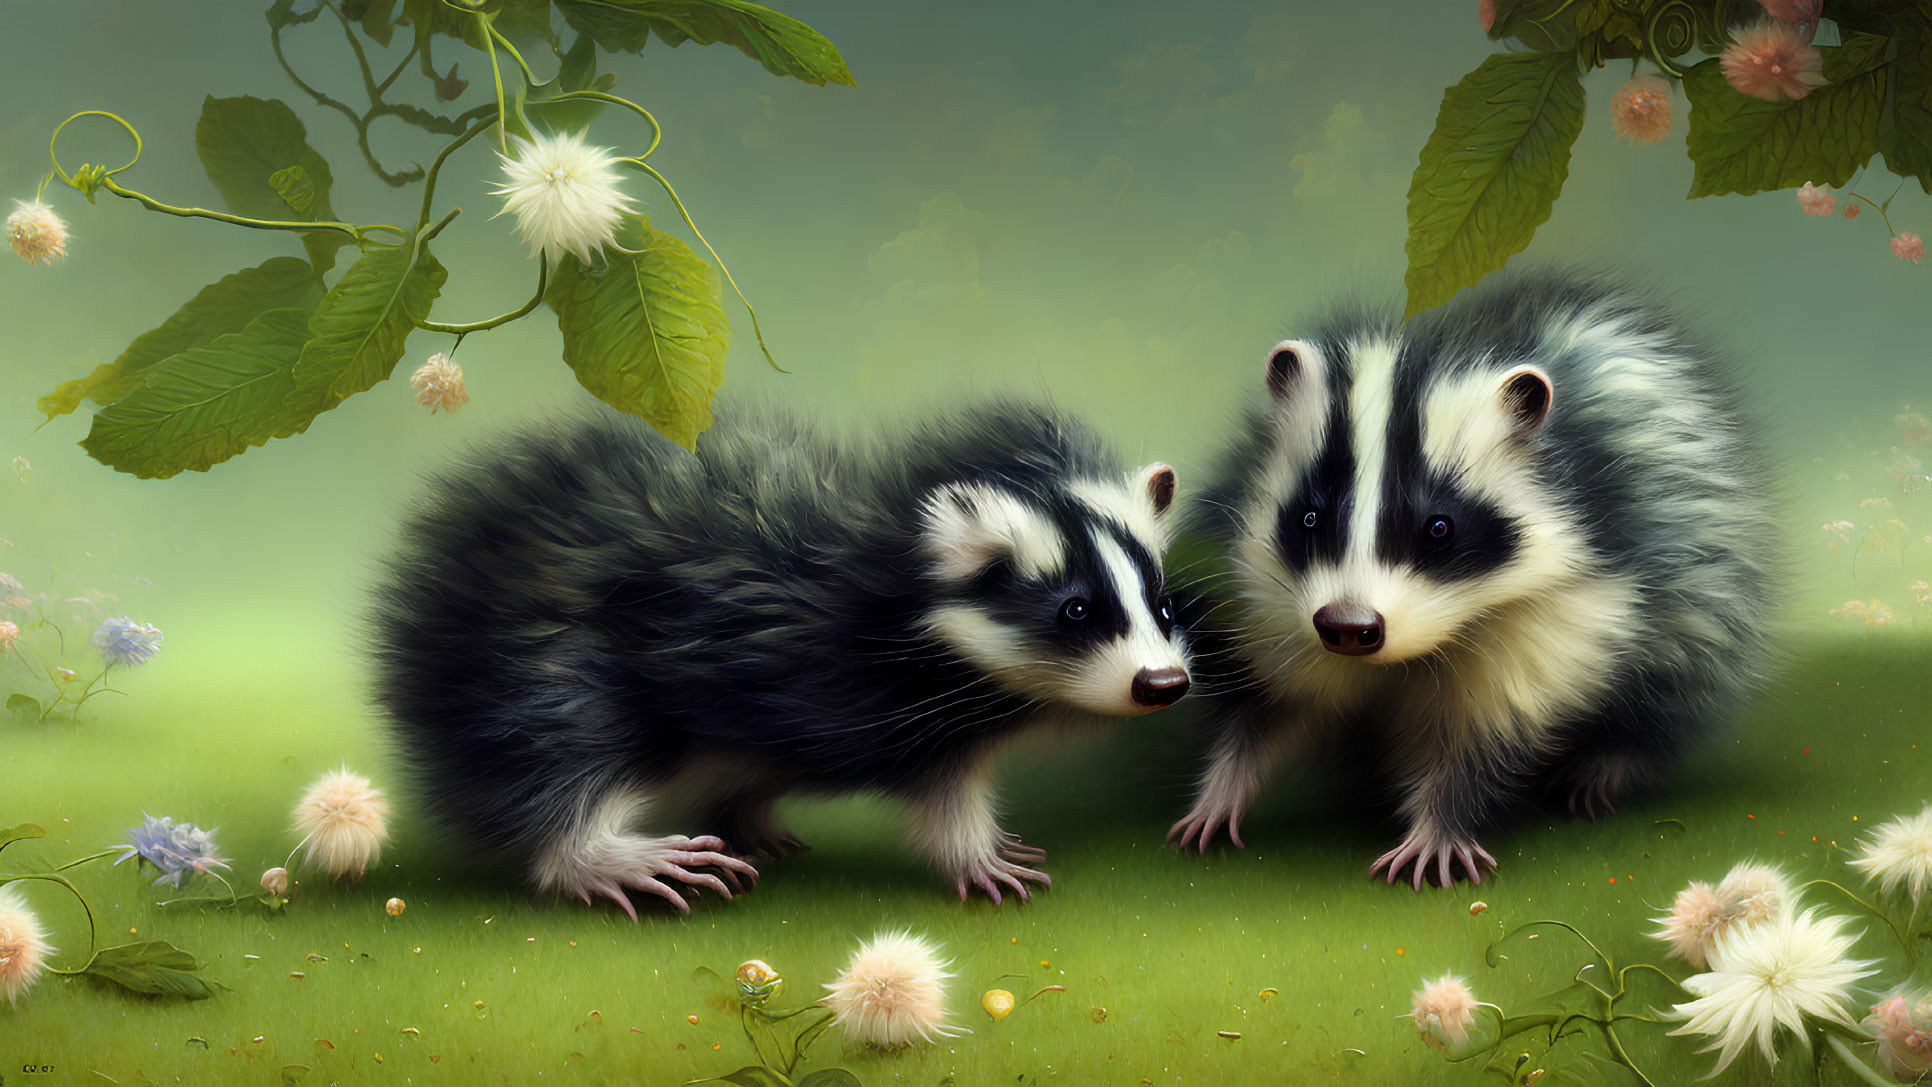 Realistic skunks in nature setting with flowers and soft focus background